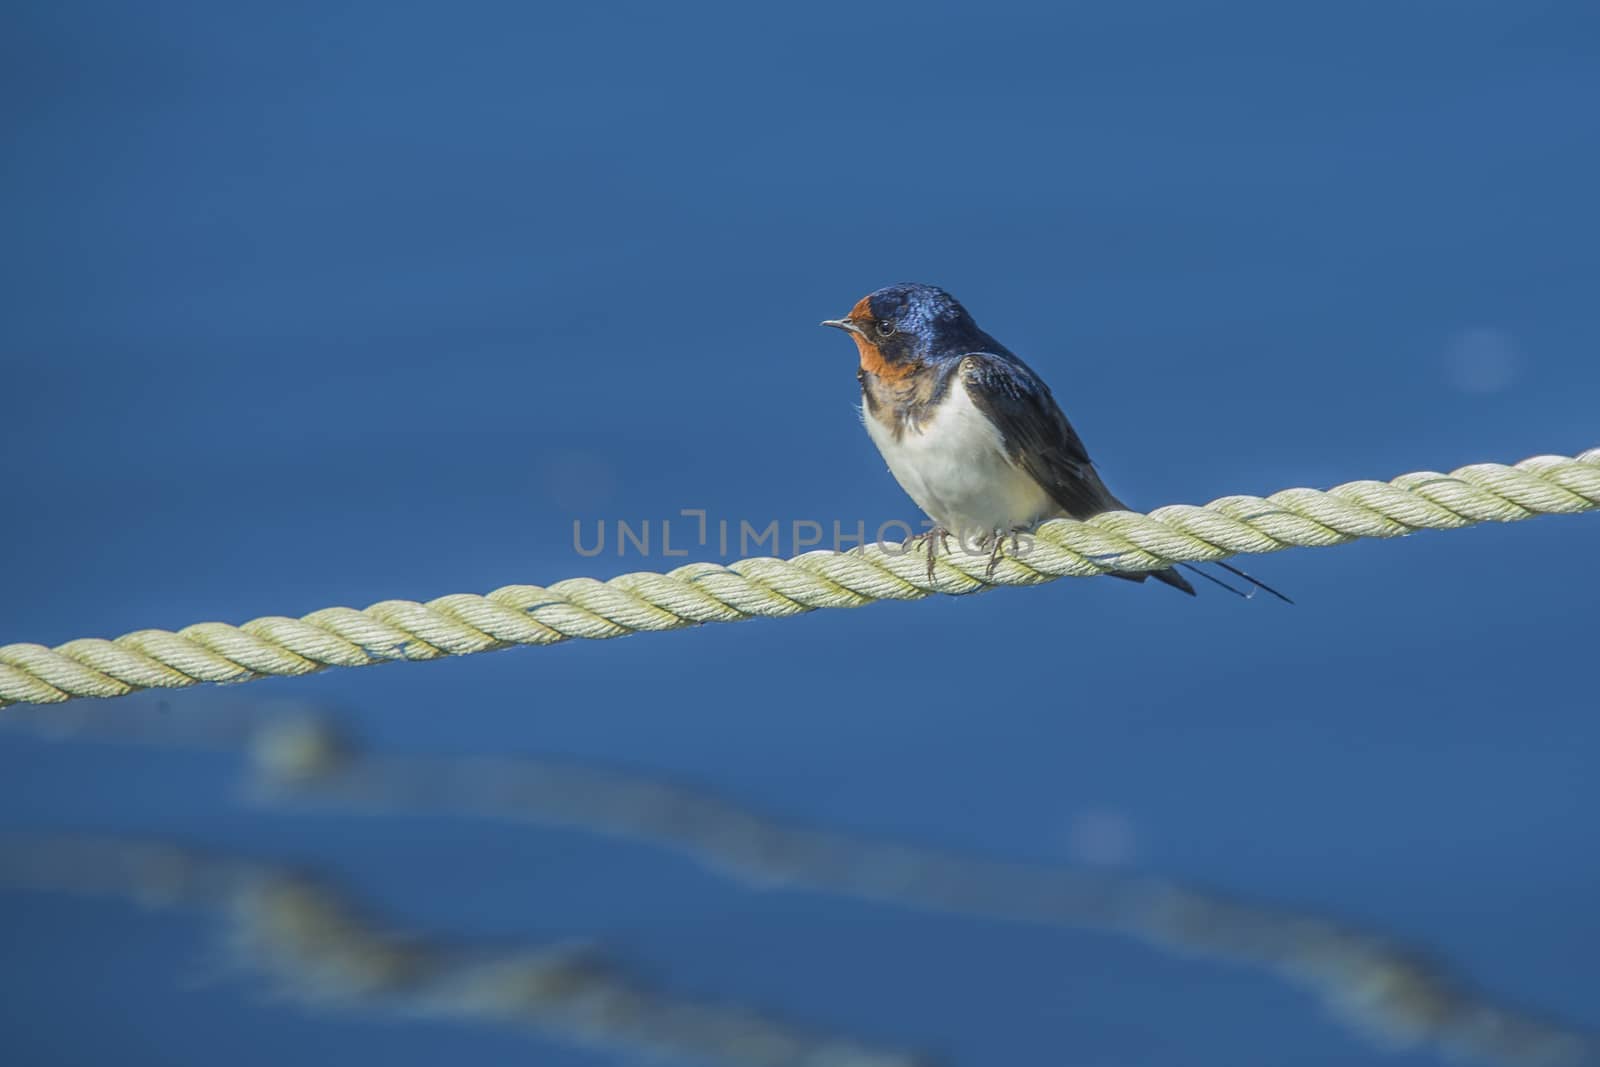 The swallow sitting on a mooring ropes at the Tista river in Halden, Norway.